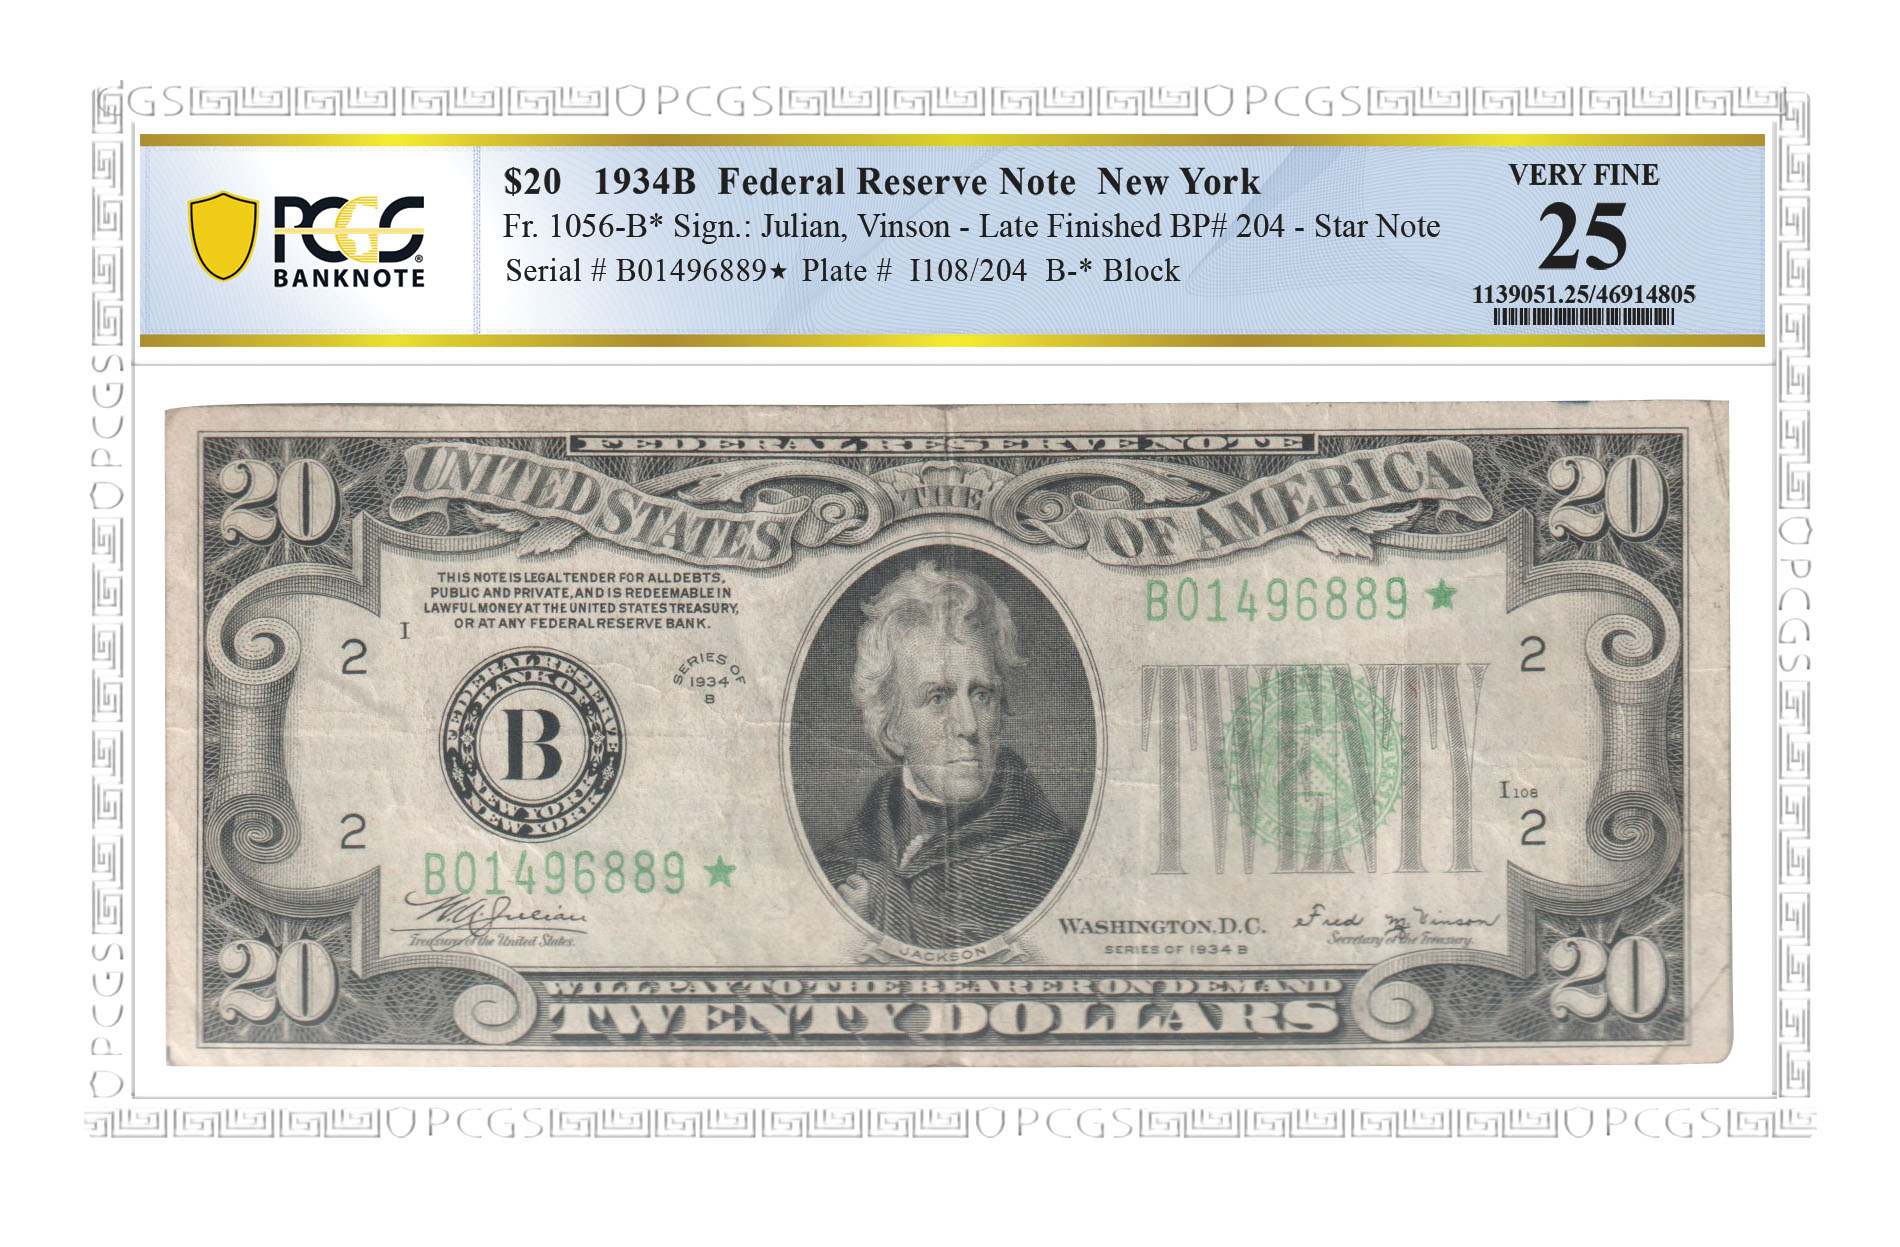 The Last $20 United States Note